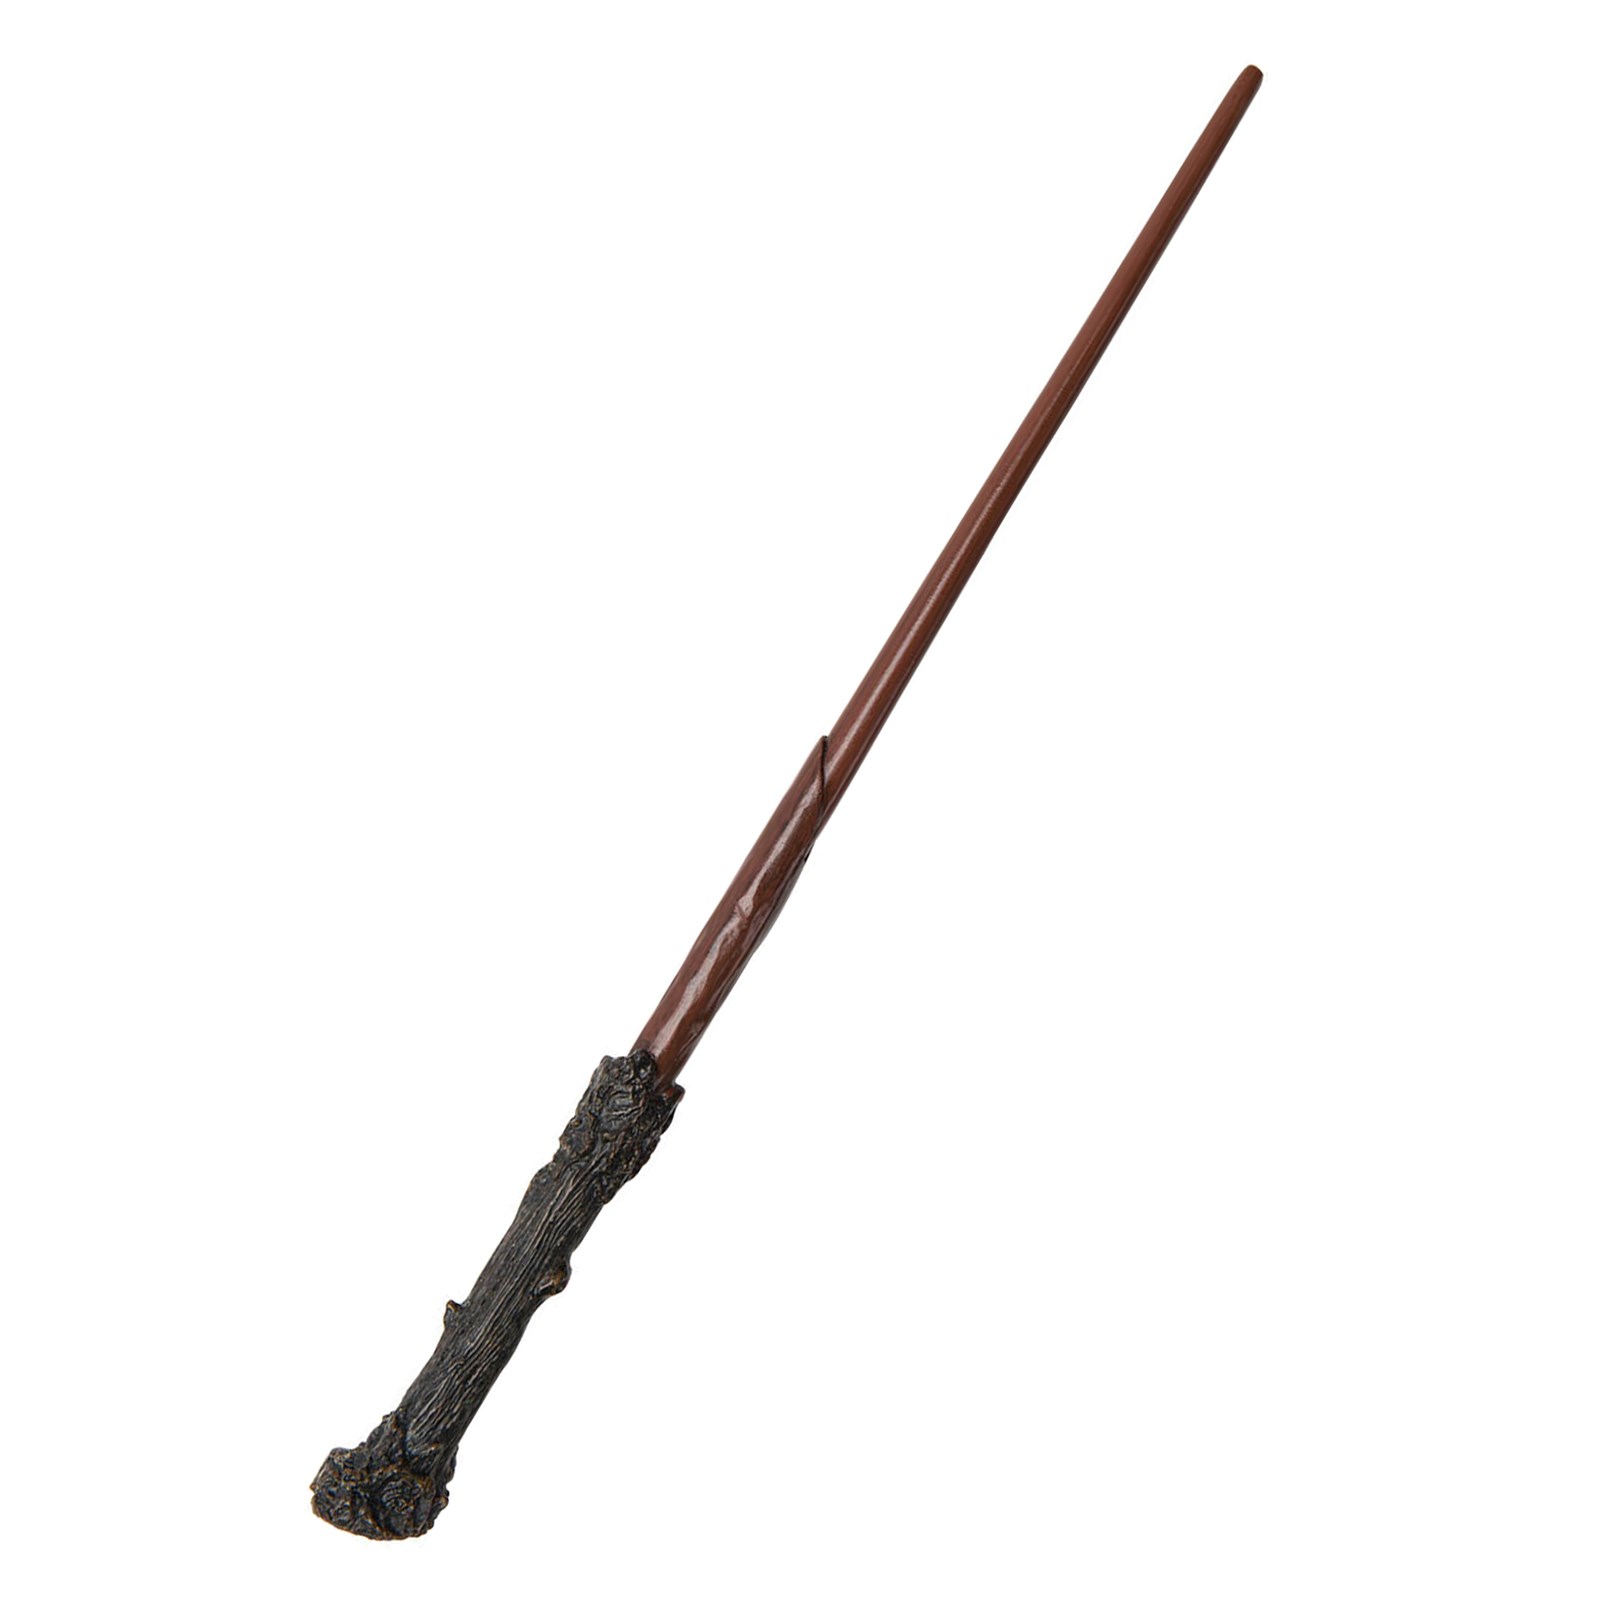 The Wizarding World Of Harry Potter-Deluxe Harry Potter Wand Halloween Costume Accessory - image 1 of 1